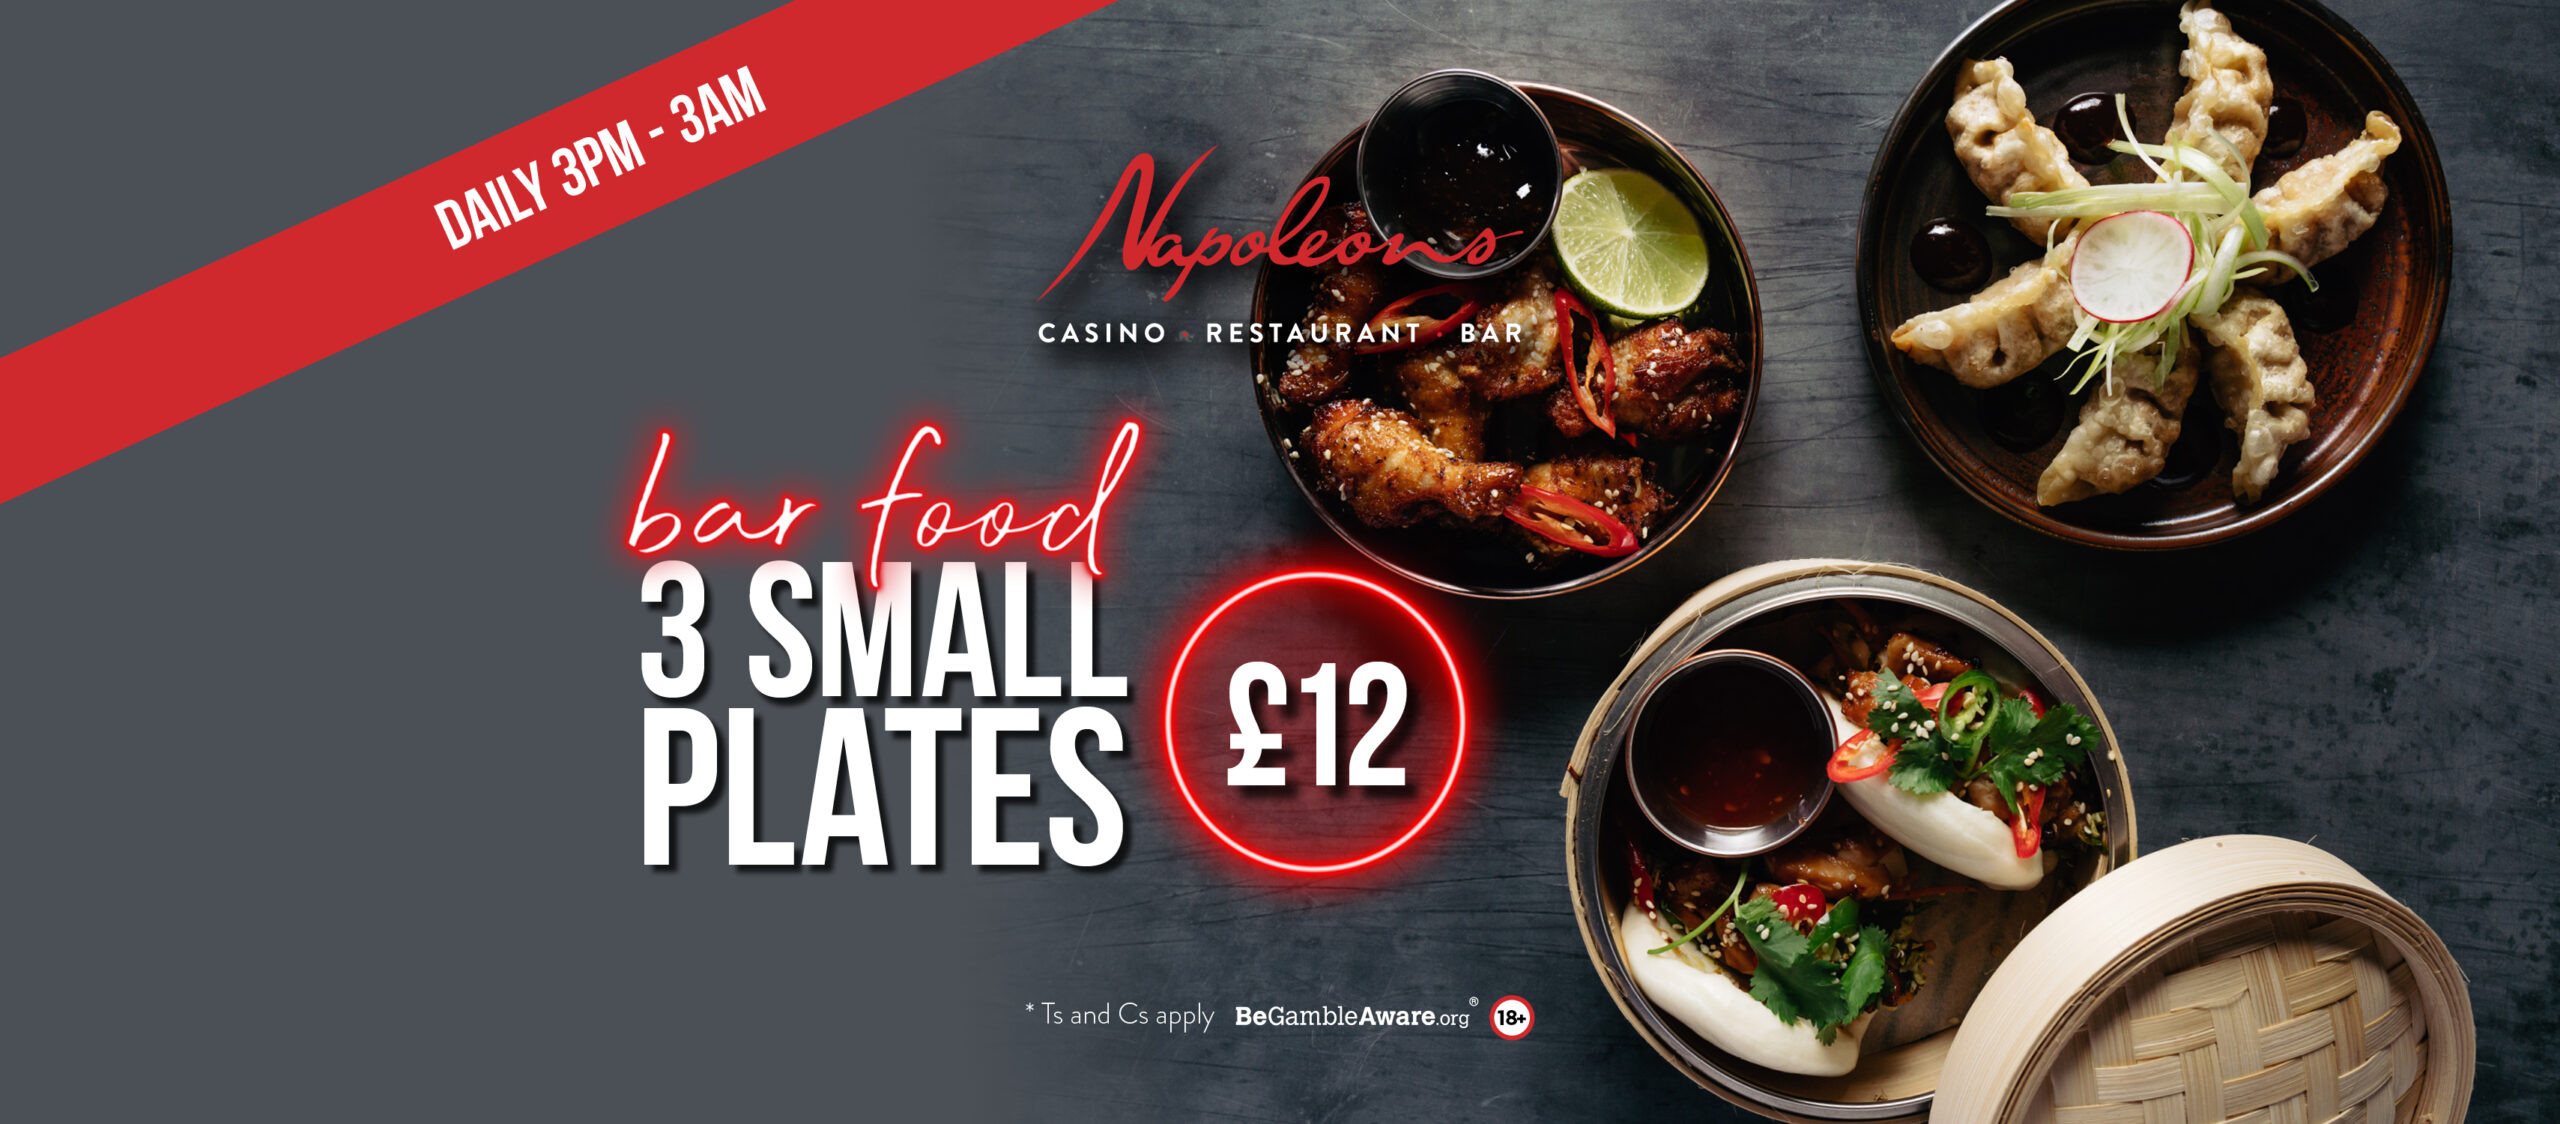 Napoleons Bar Food - Late Night Dining Offers - 3 Small Plates for £12